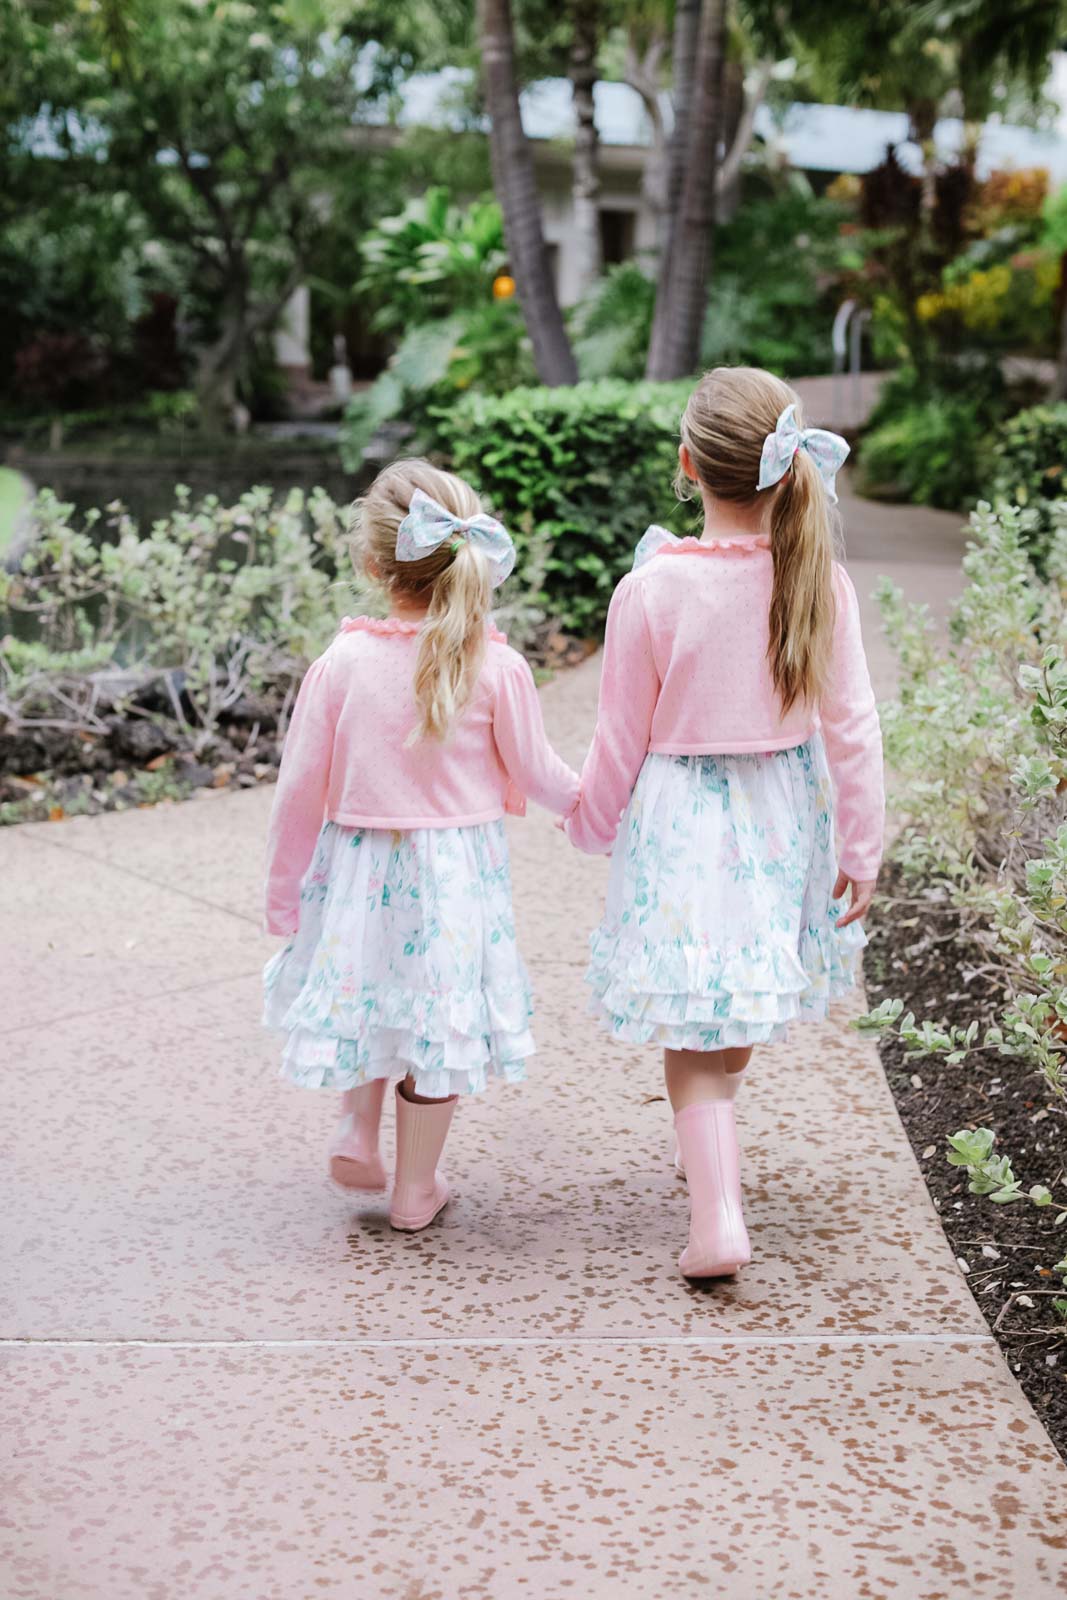 Matching Easter dresses